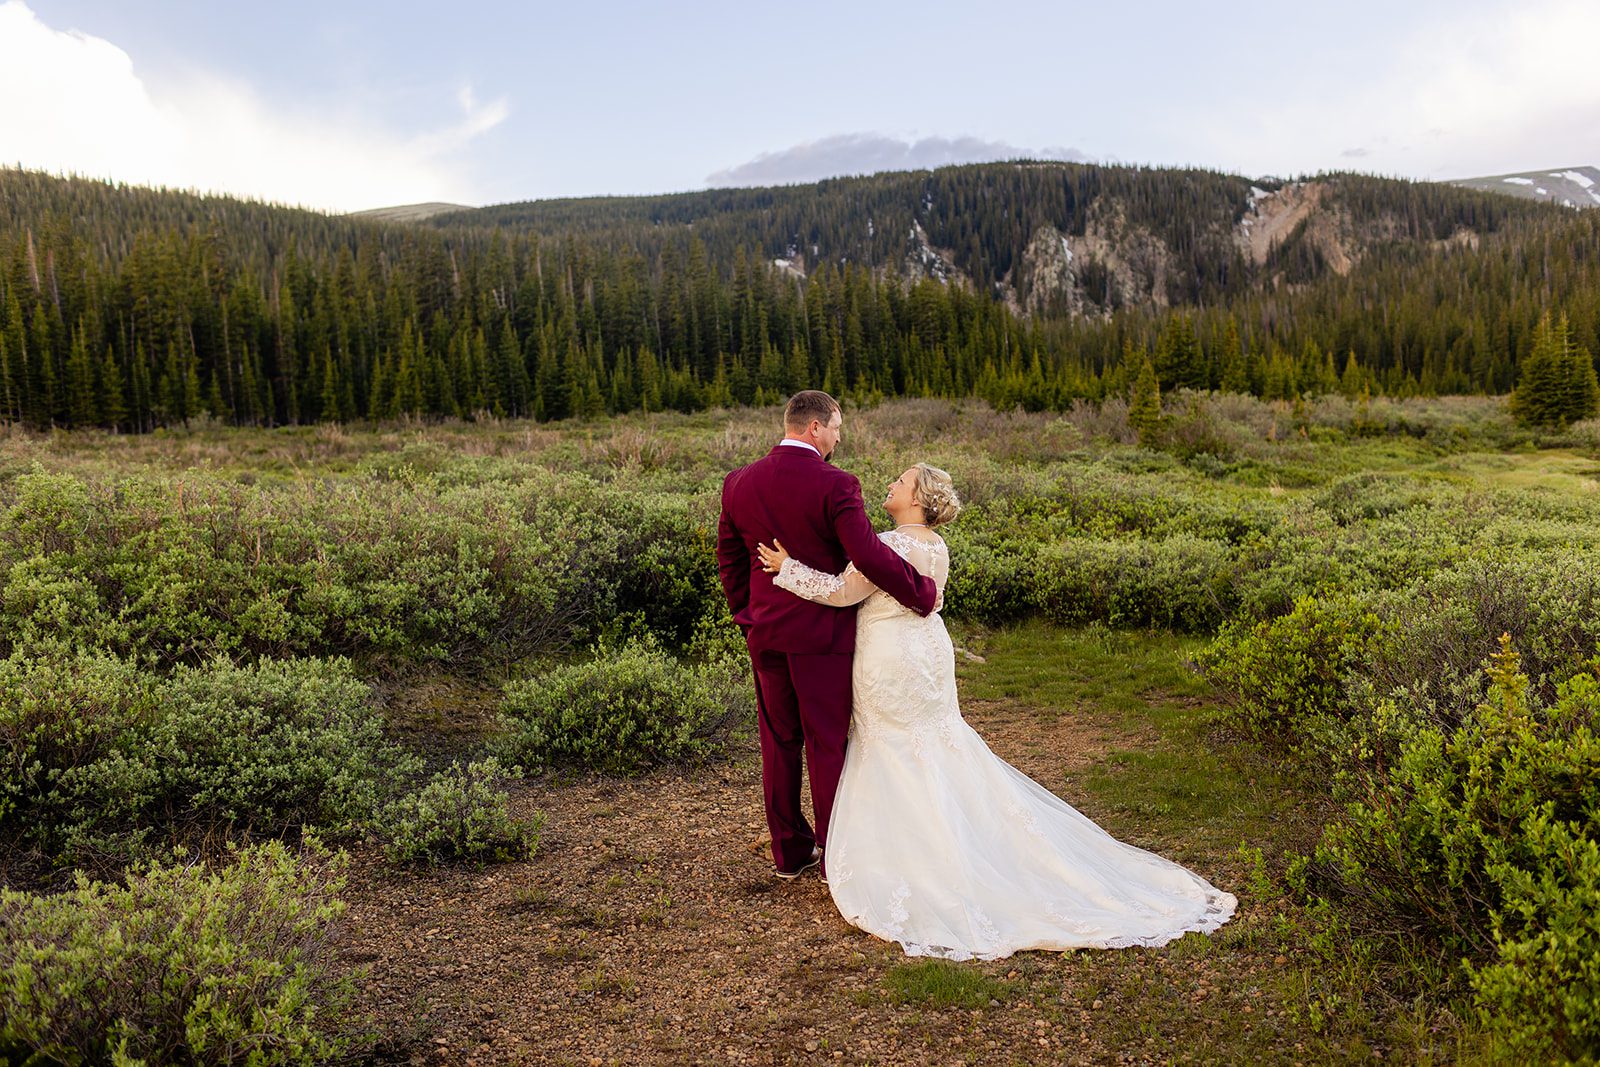 Bride and groom holding each other after their wedding ceremony in the field by Brainard Lake.